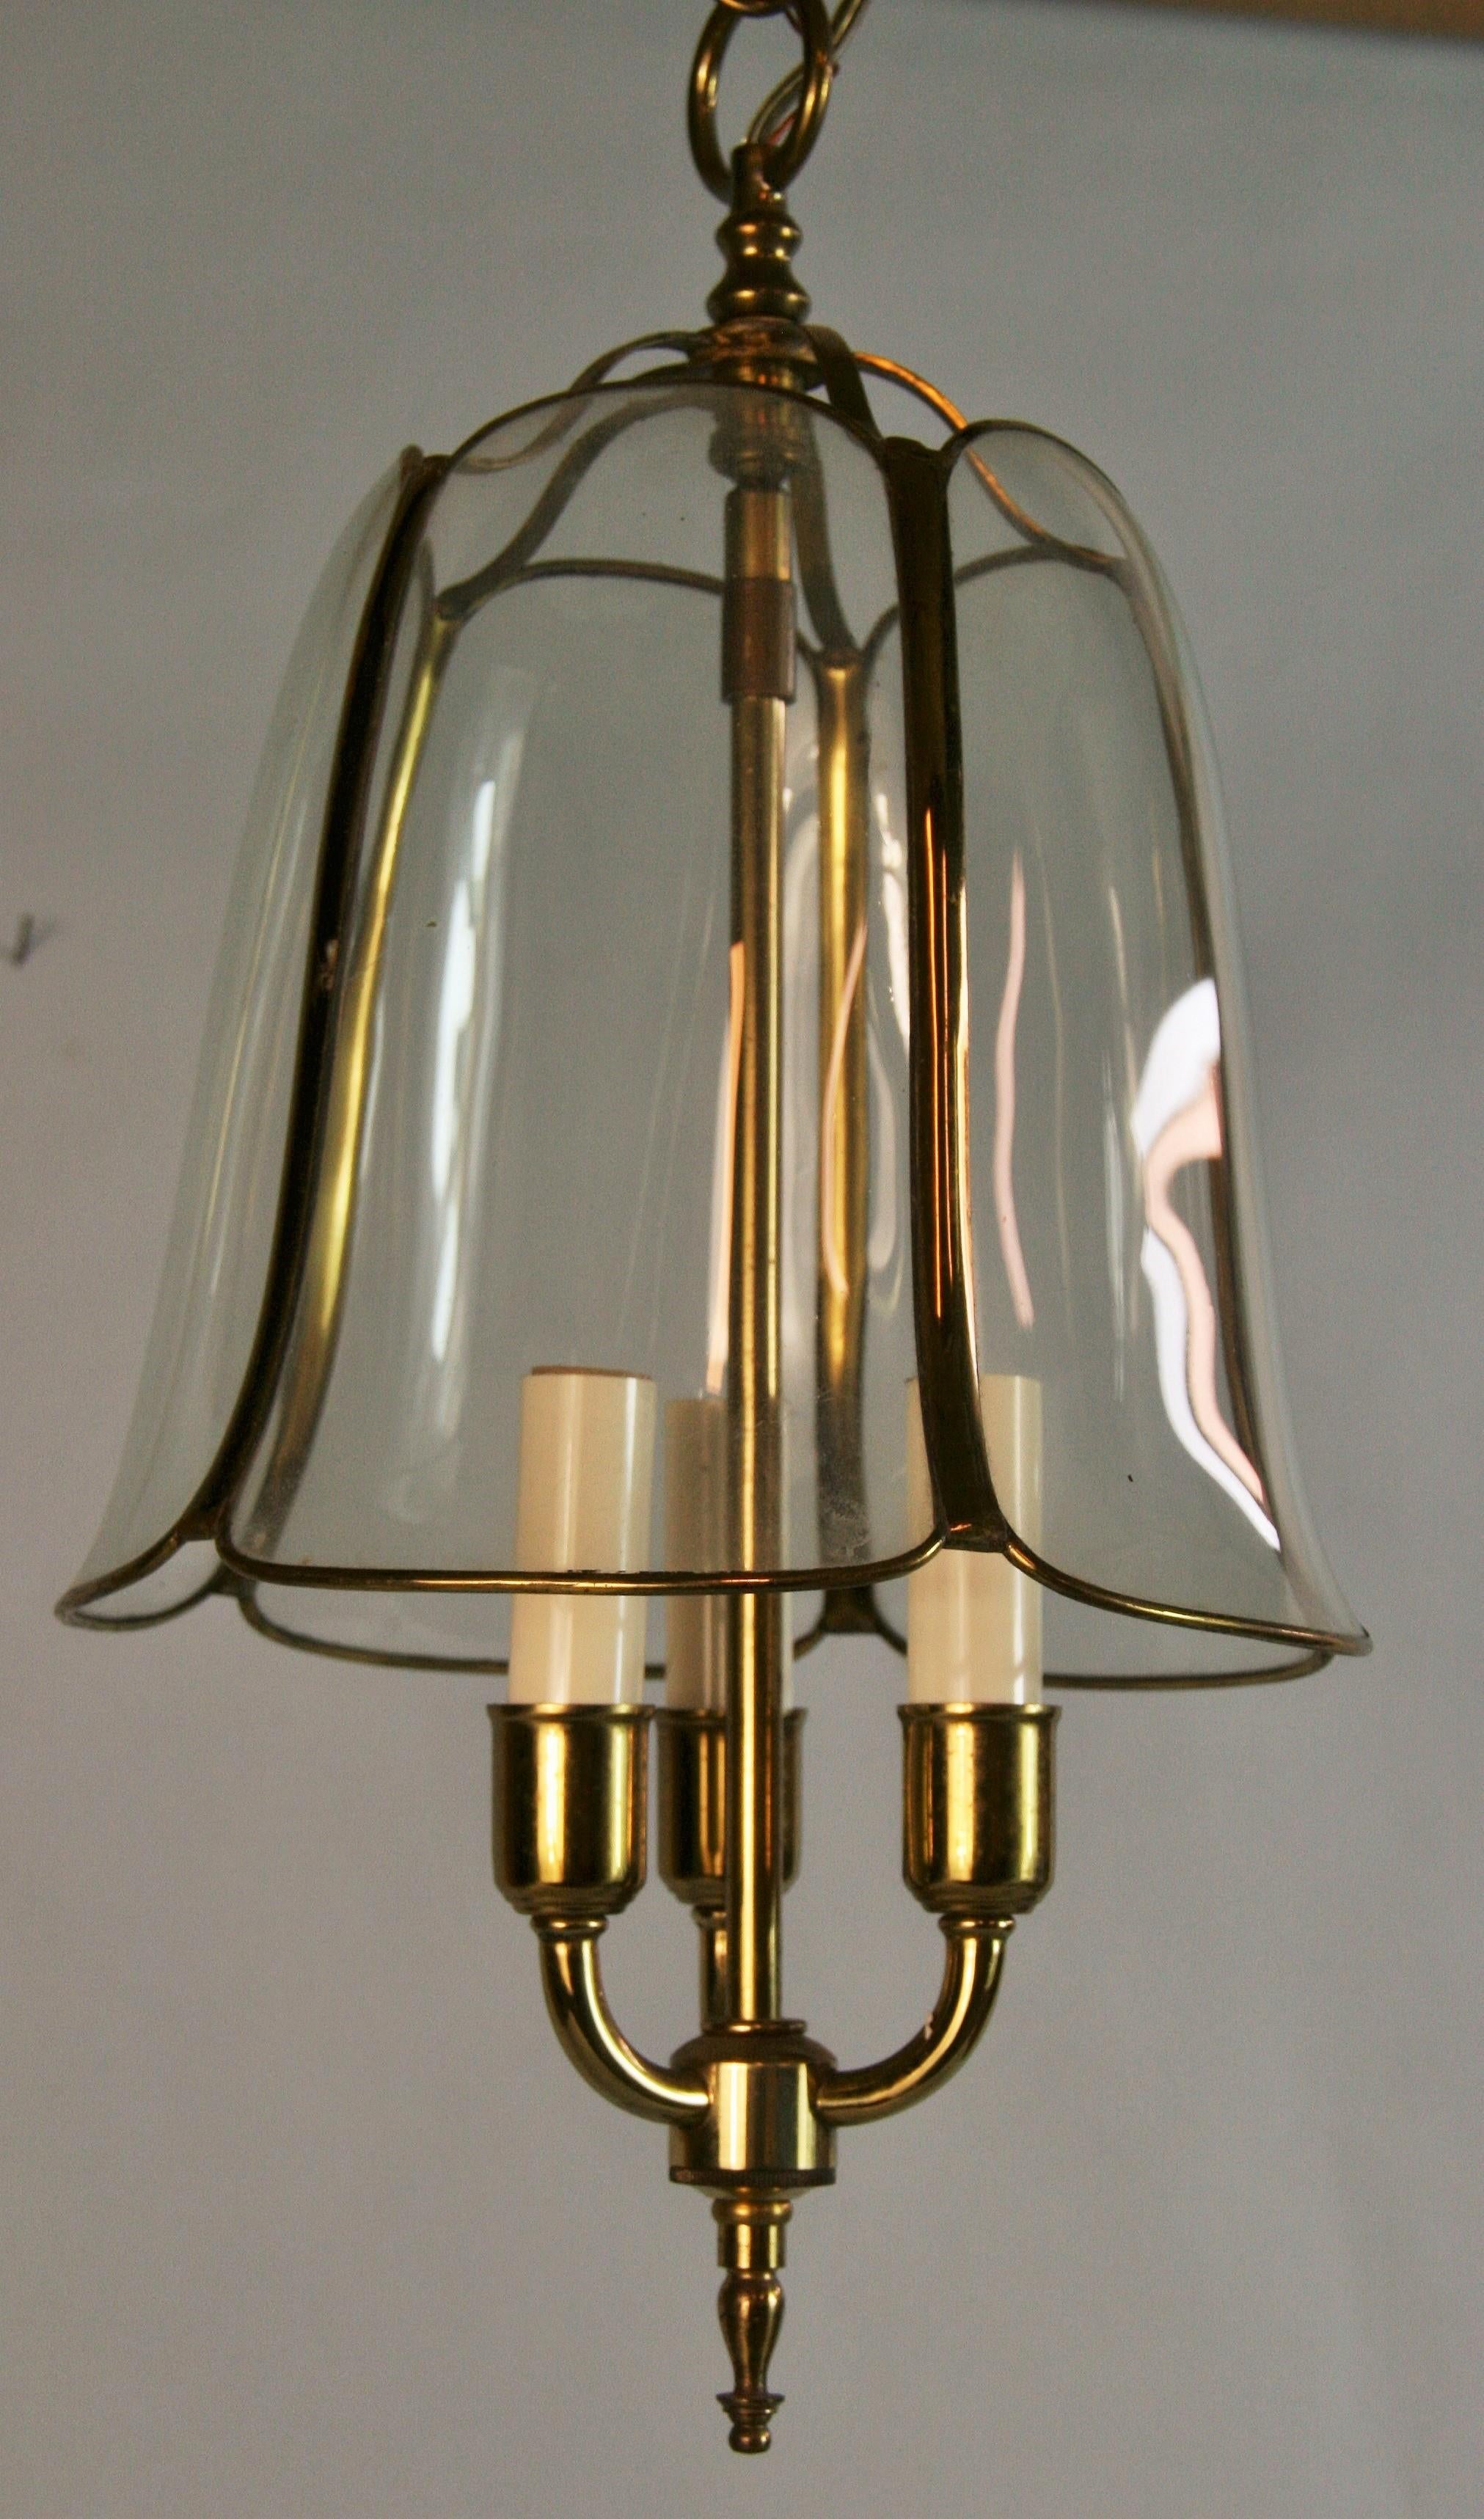 1-4025 Tulip three-light brass and bent glass  pendant
Takes 60 watt candelabra based bulb
Supplied with 2 feet chain and canopy.
Rewired
        